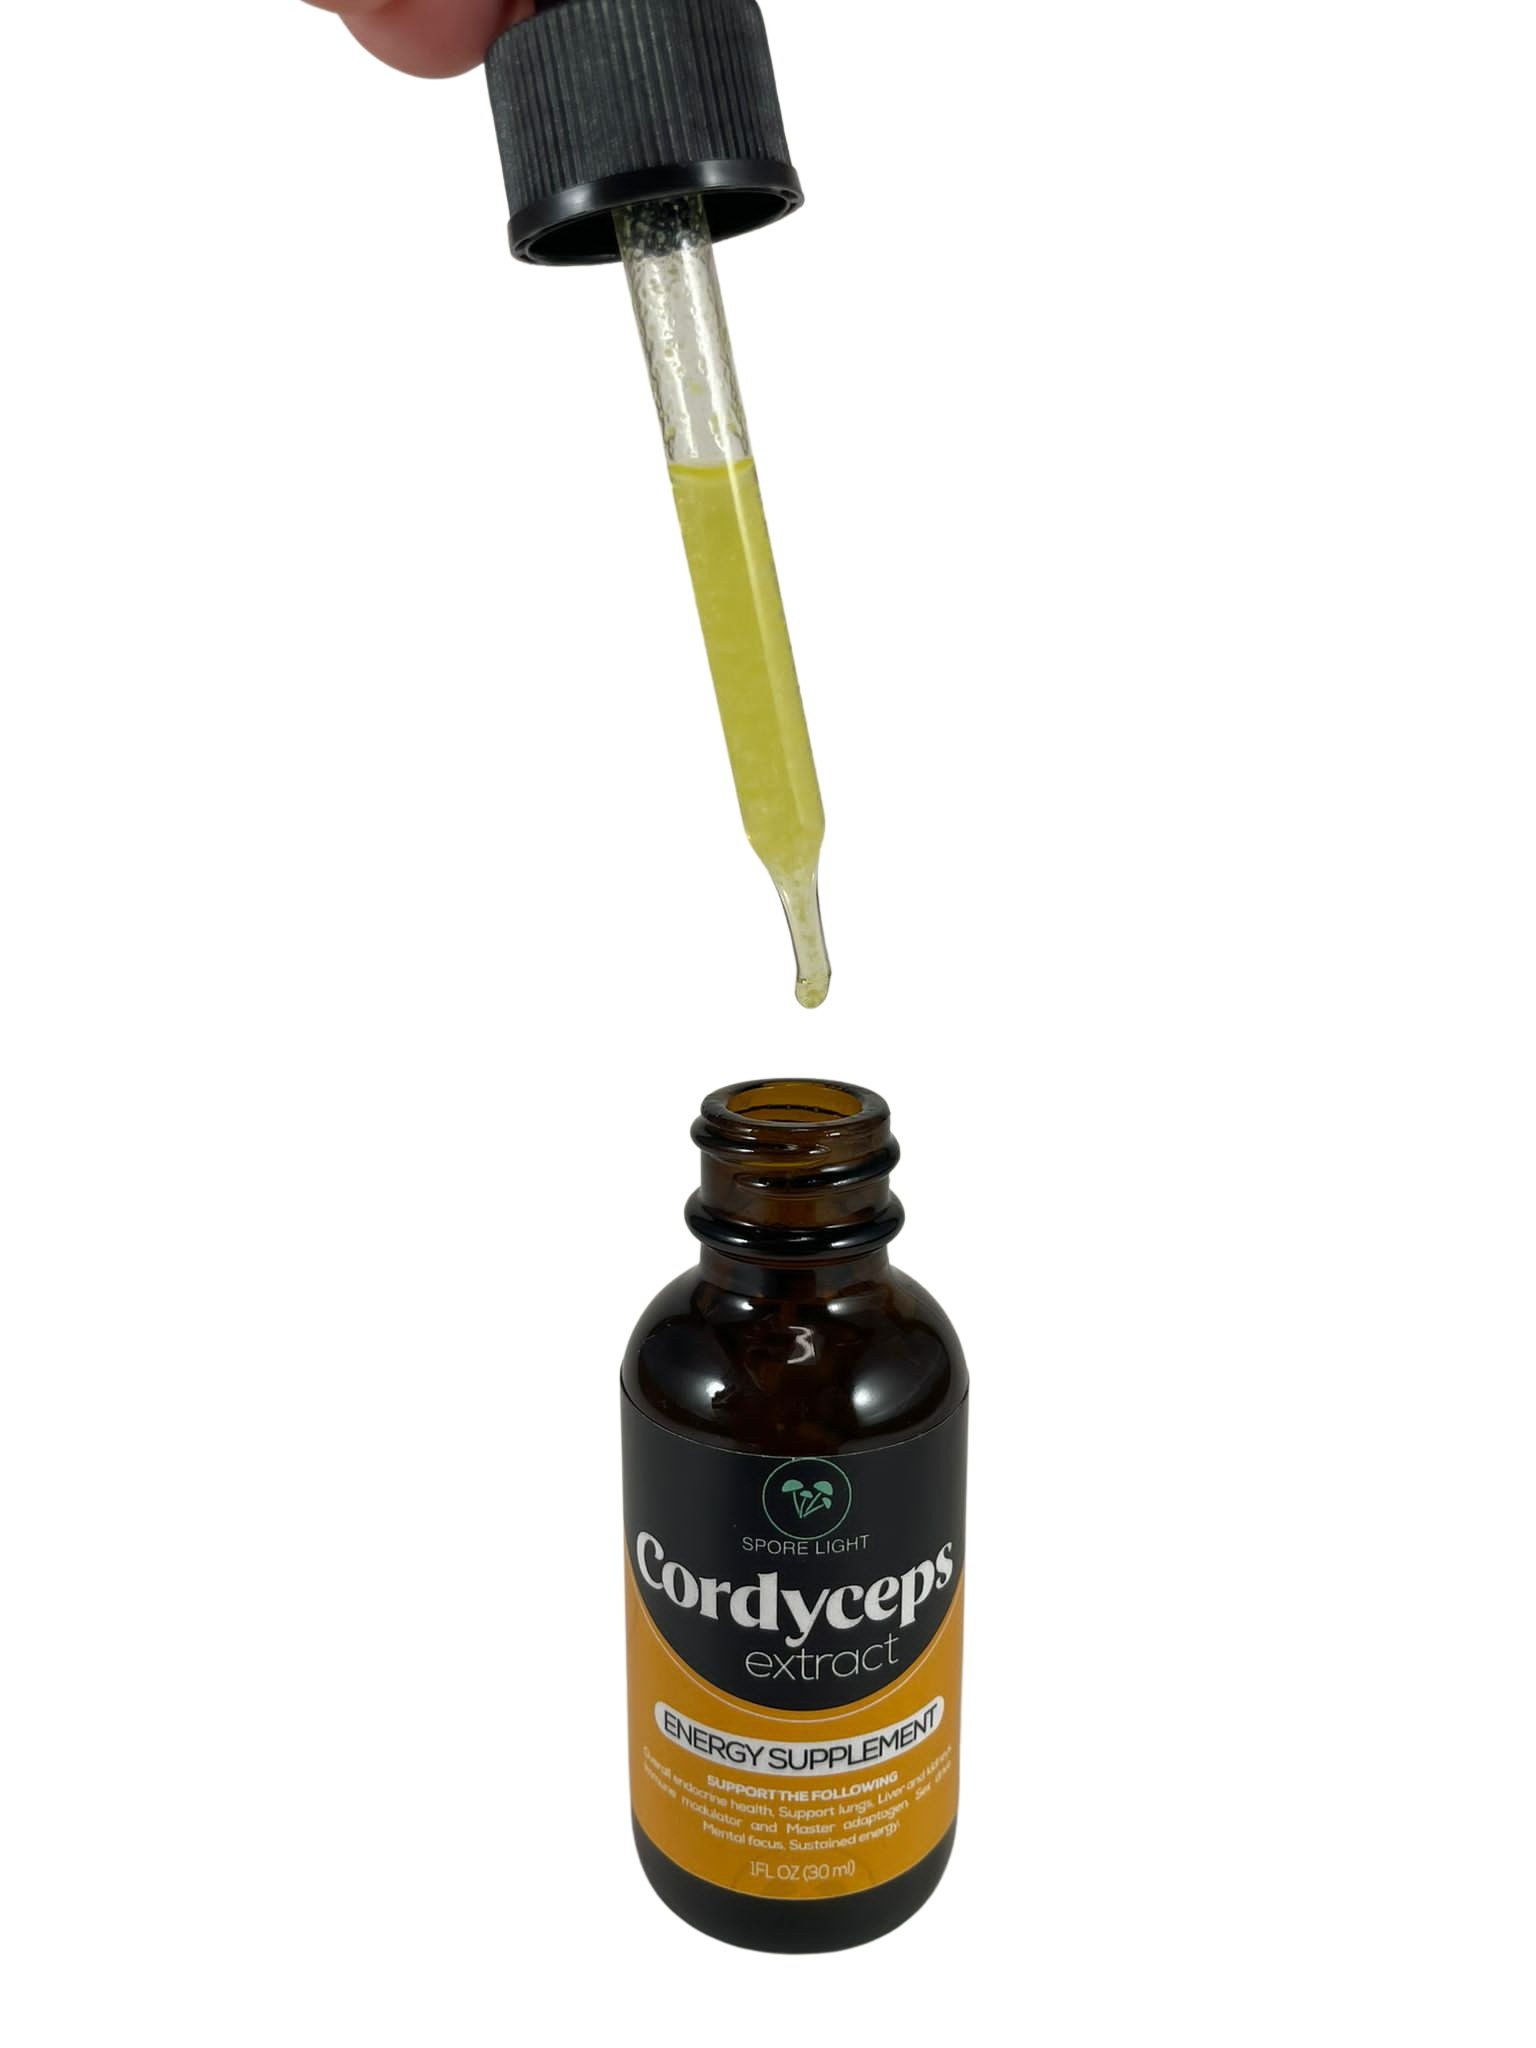 Spore Light Cordyceps extract, Energy Supplement. Picture of the liquid dropper showing the thickness of the Polizacharydes. 1FL OZ.